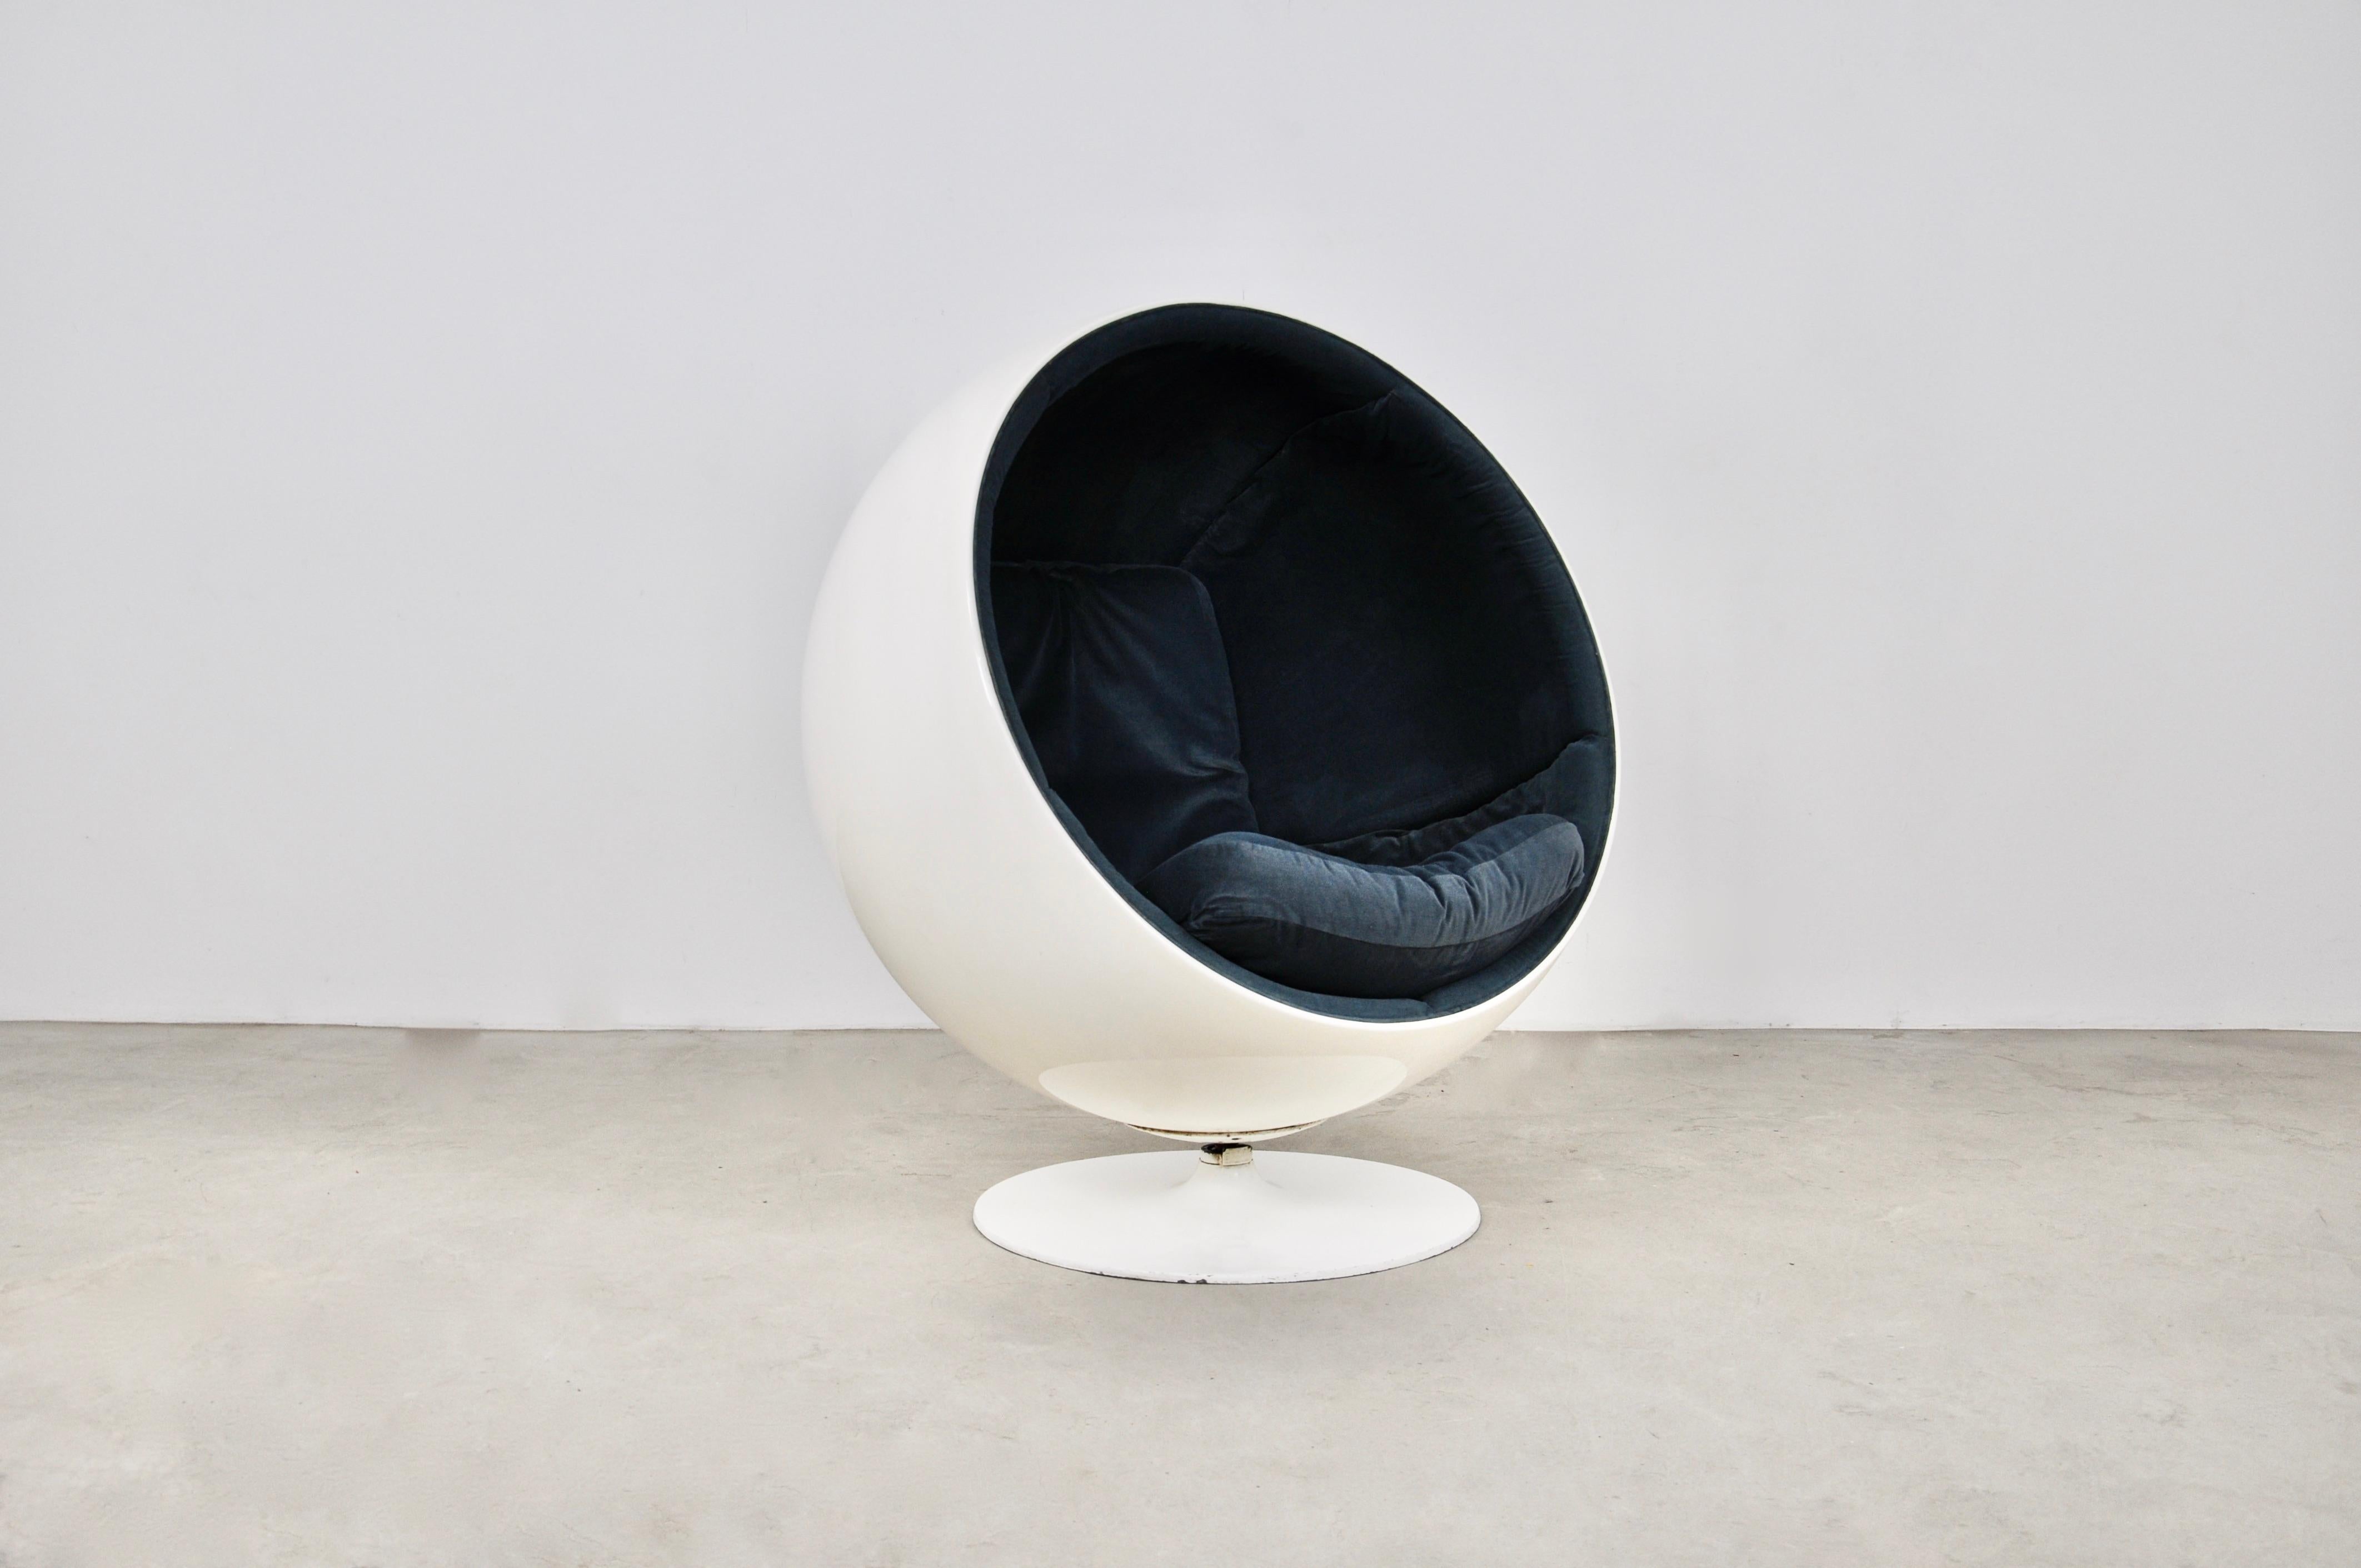 Ball cocoon armchair that turns 360° on itself. The cushions and the inside of the chair are in blue fabric. Wear due to time and age of the chair